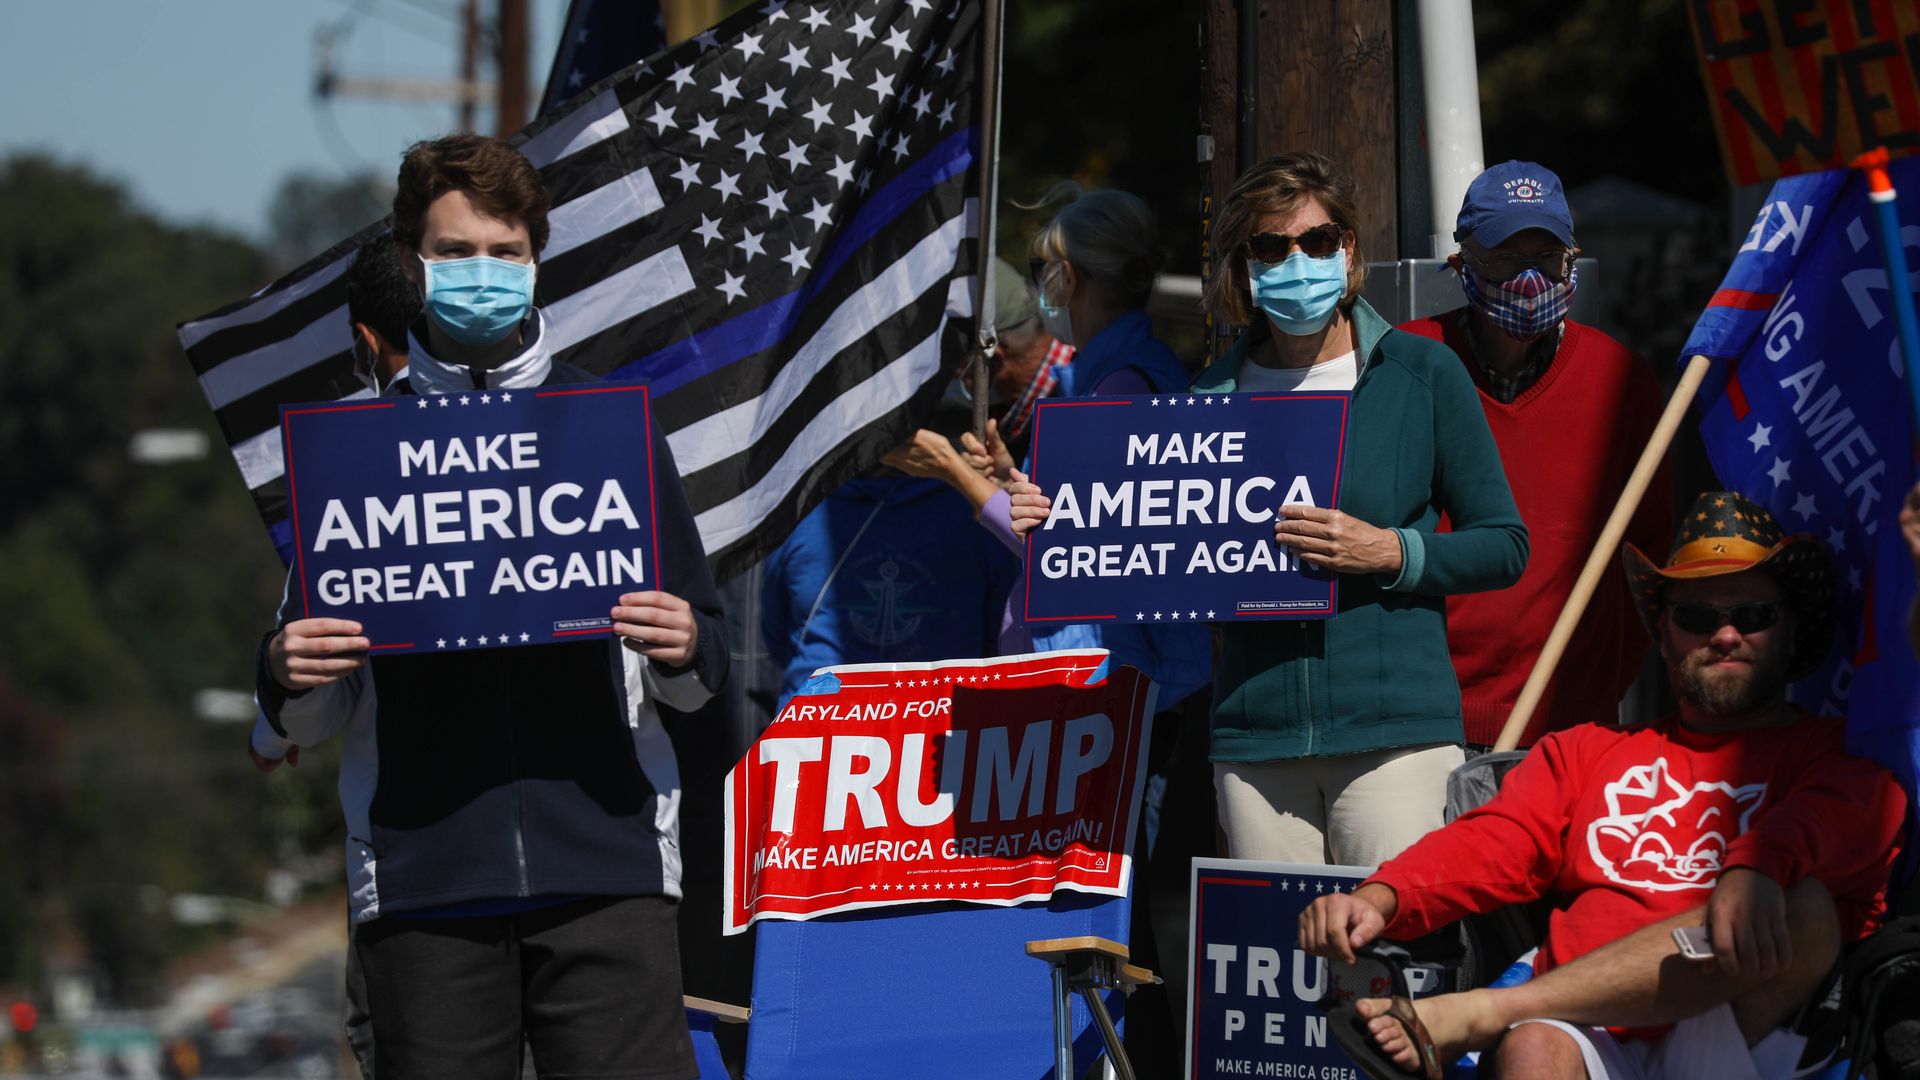 A group of US President Donald Trump supporters gather outside Walter Reed Hospital where he is receiving treatment after COVID-19 diagnosis on October 2, 2020, in Bethesda, Maryland.